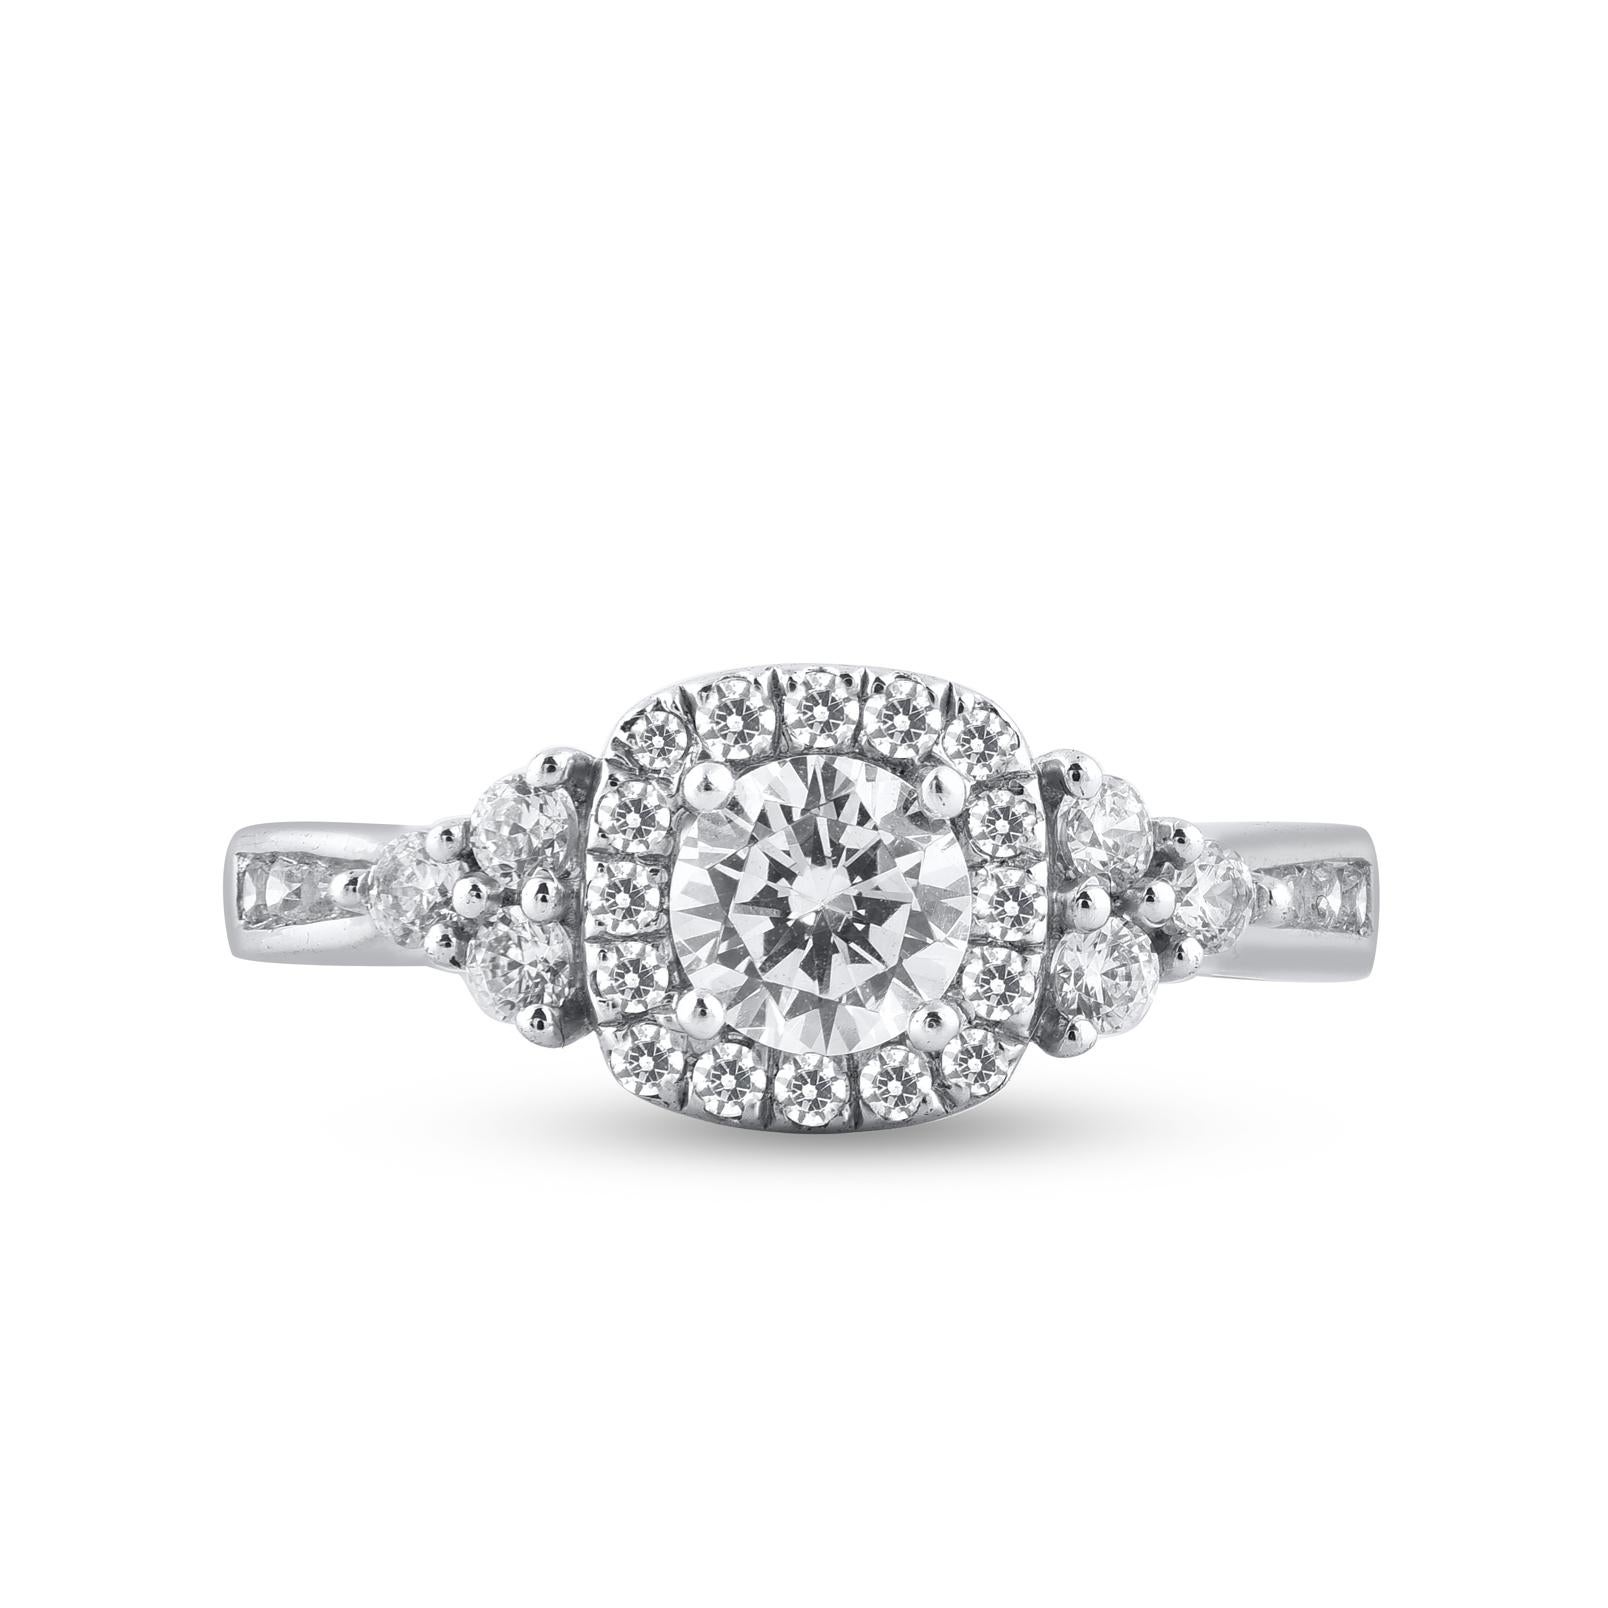 With one look of this Beautiful Round Diamond Engagement Ring crafted in 18 karat white gold. This ring is beautifully designed and studded with 0.50ct center stone and 0.50ct of diamond frame and lined diamonds on shank in prong and micro-prong